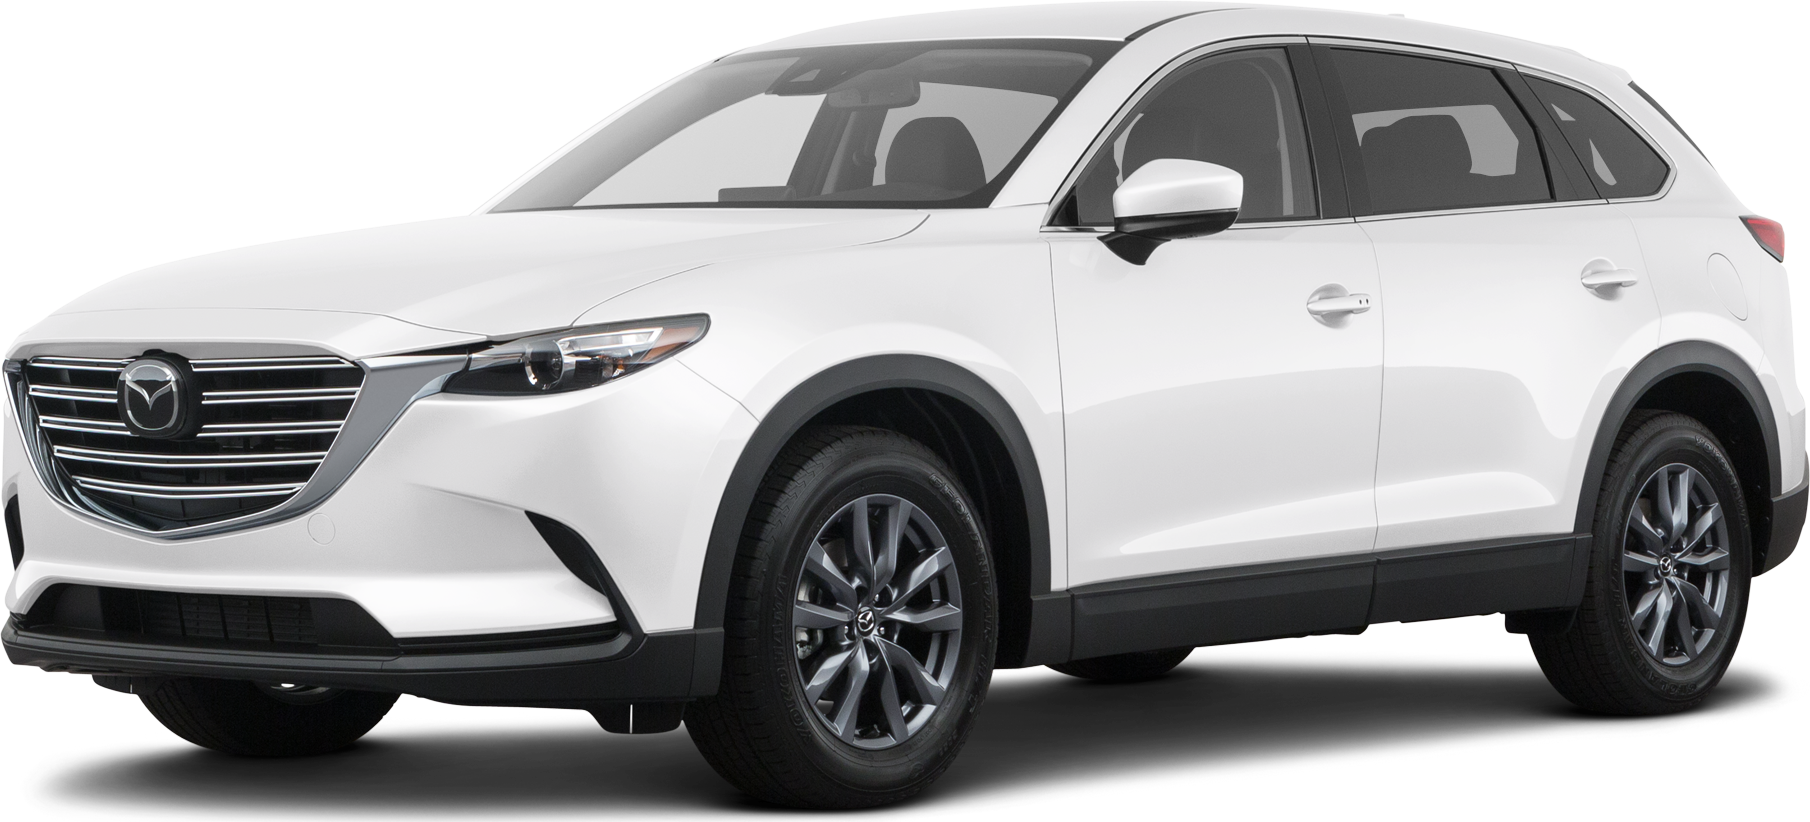 2021 Mazda Cx 9 Price Value Ratings And Reviews Kelley Blue Book